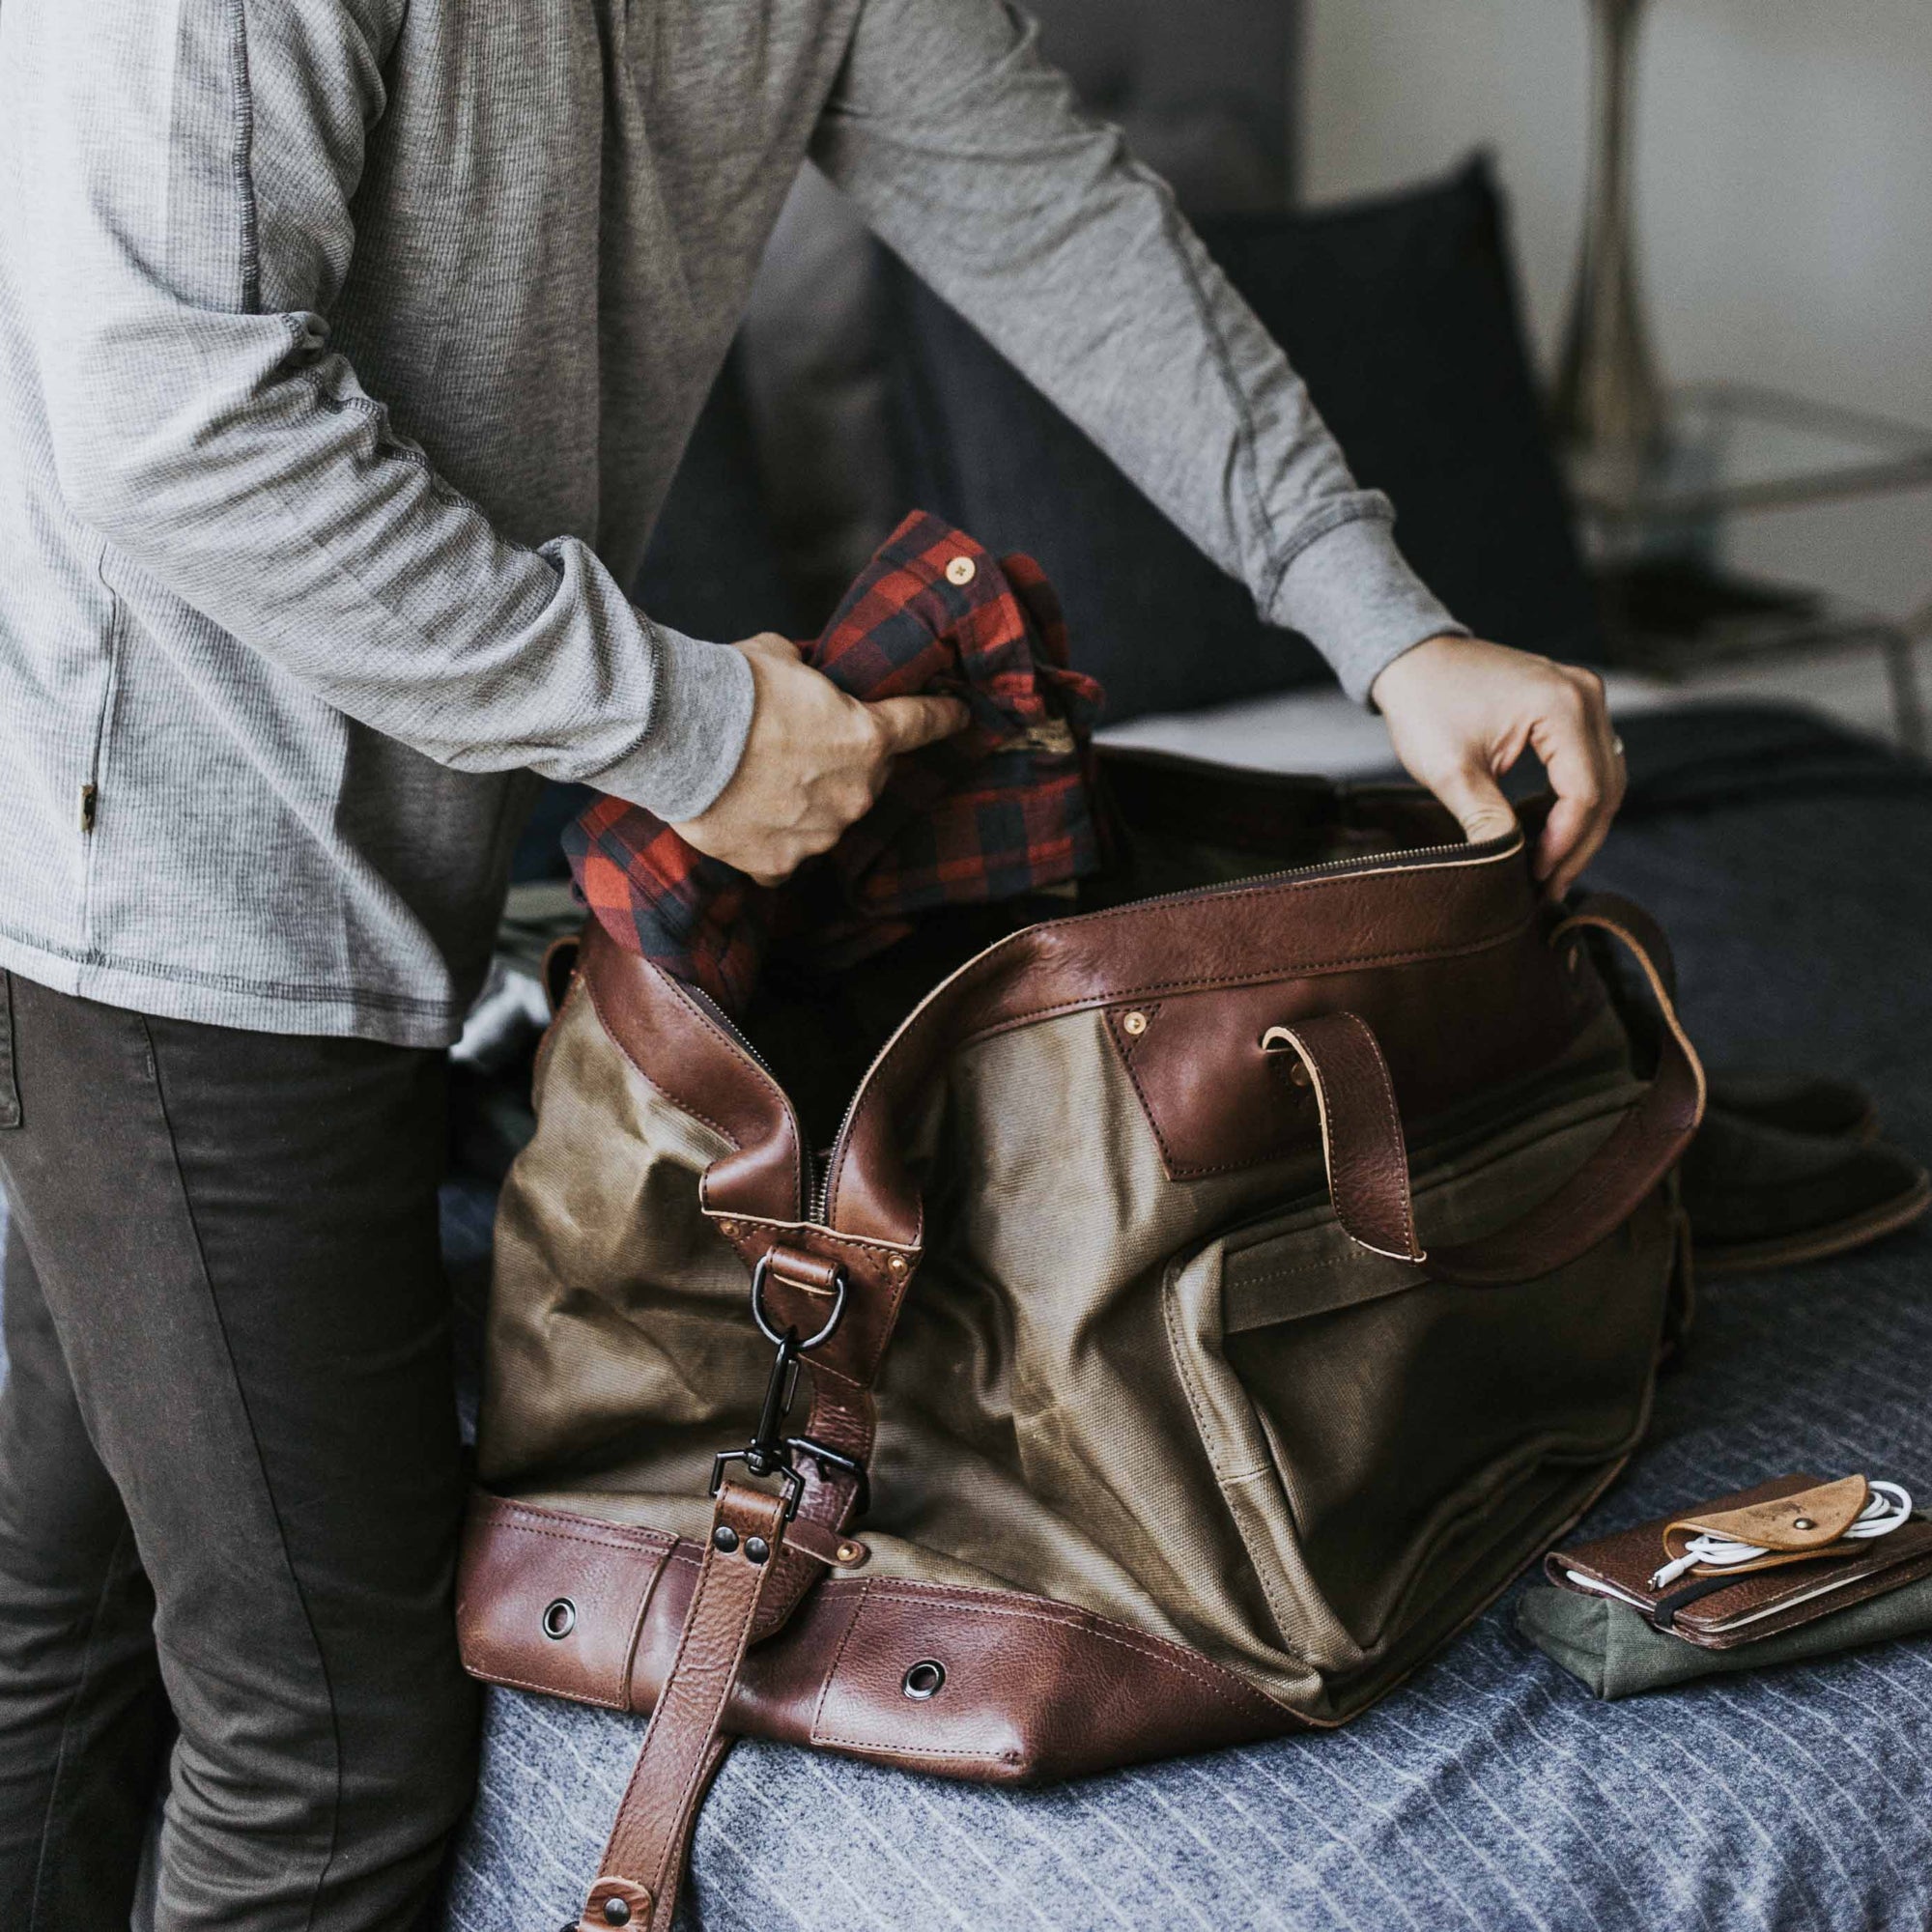 Waxed Canvas Leather Travel Bag Duffle Bag Weekender Bag with Shoe Pouch